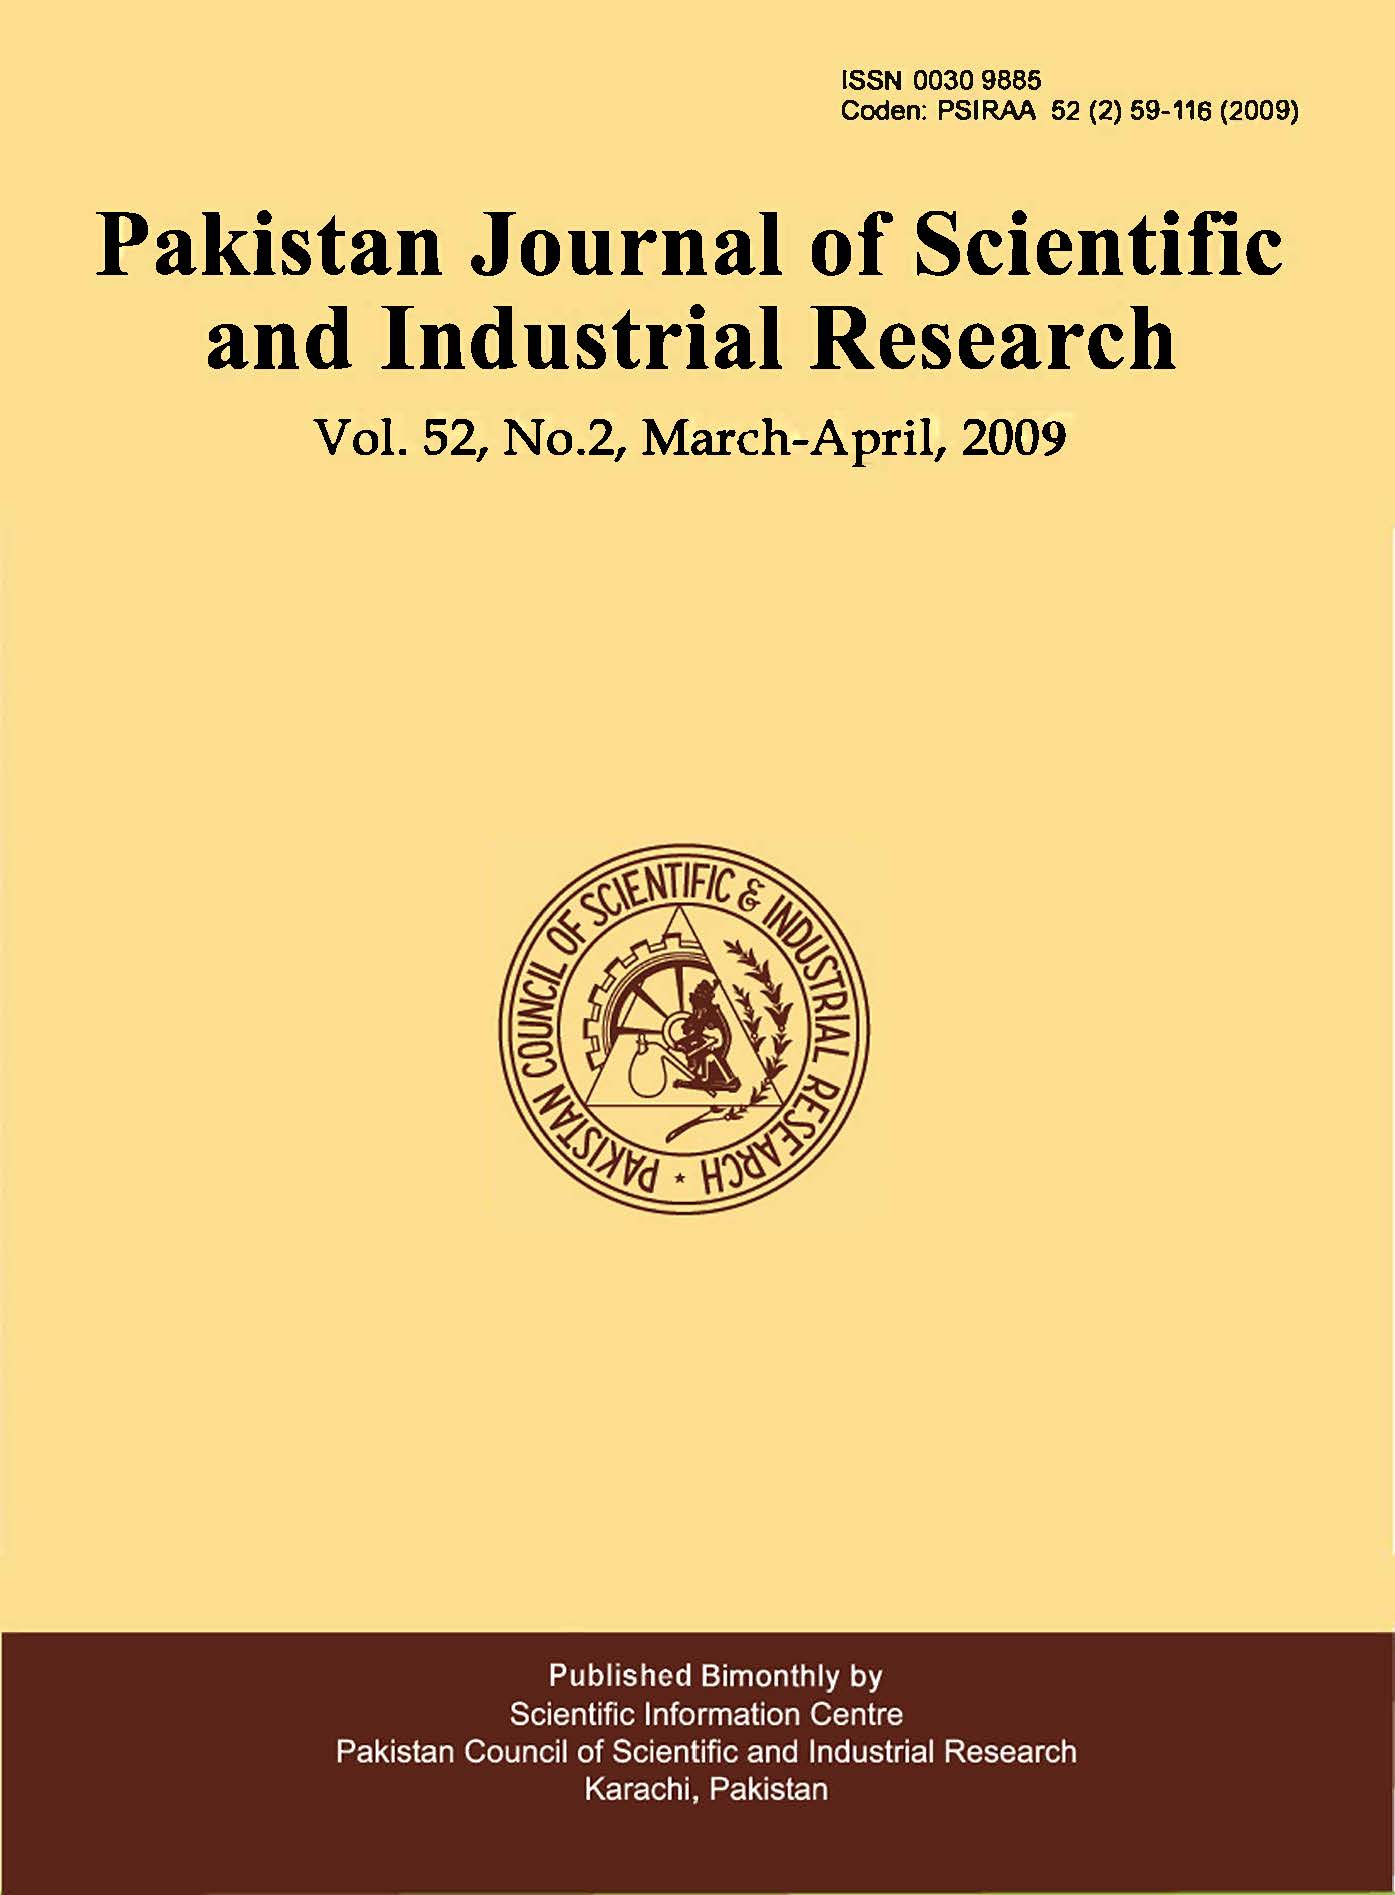 					View Vol. 52 No. 2 (2009): Pakistan Journal of Scientific and Industrial Research
				